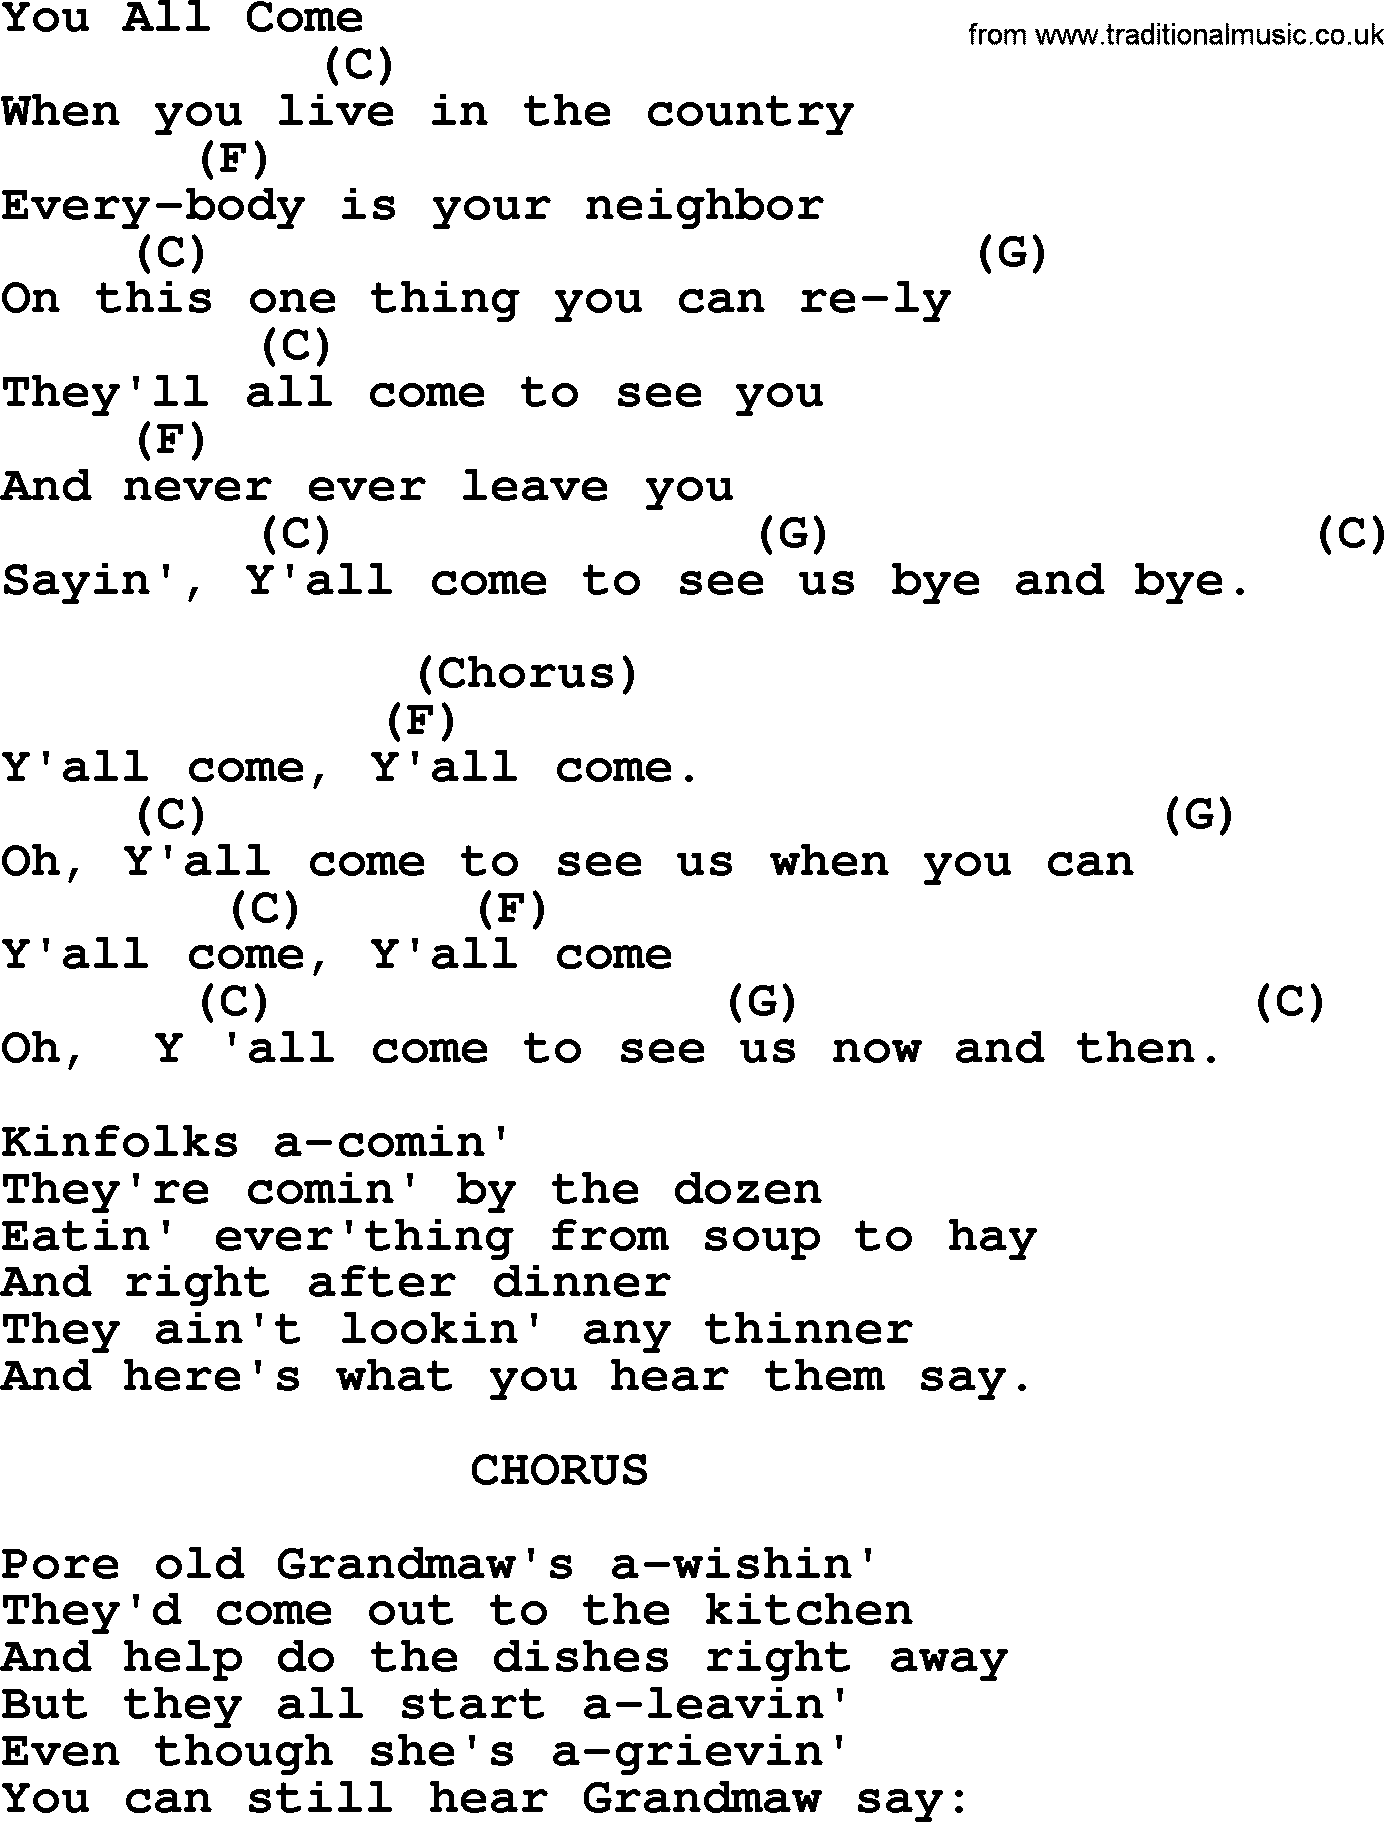 Bluegrass song: You All Come, lyrics and chords